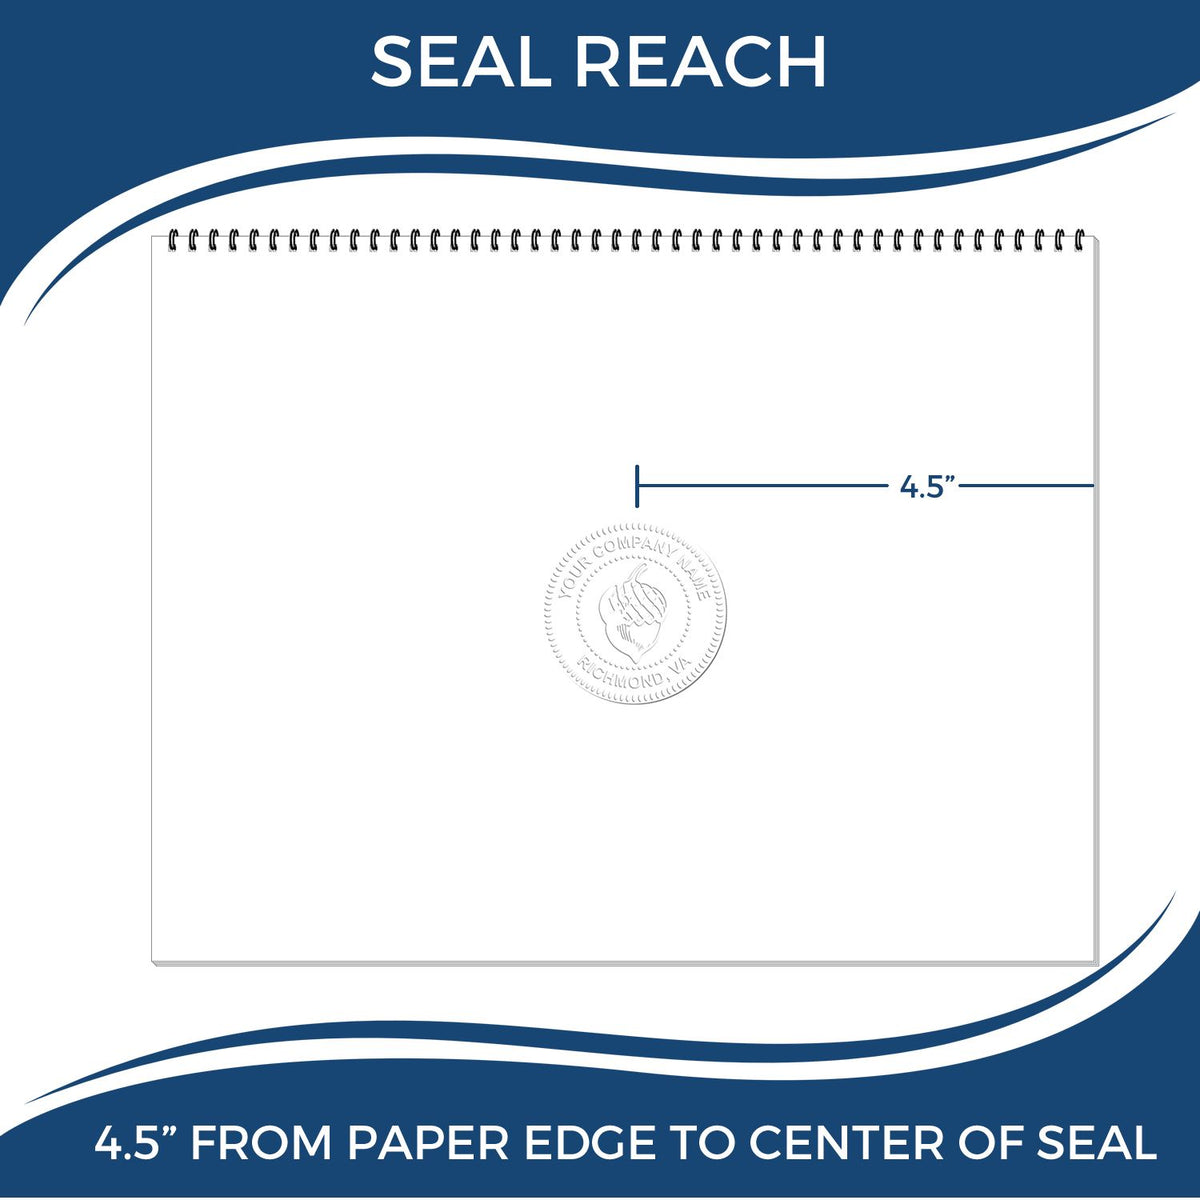 An infographic showing the seal reach which is represented by a ruler and a miniature seal image of the Extended Long Reach Tennessee Architect Seal Embosser